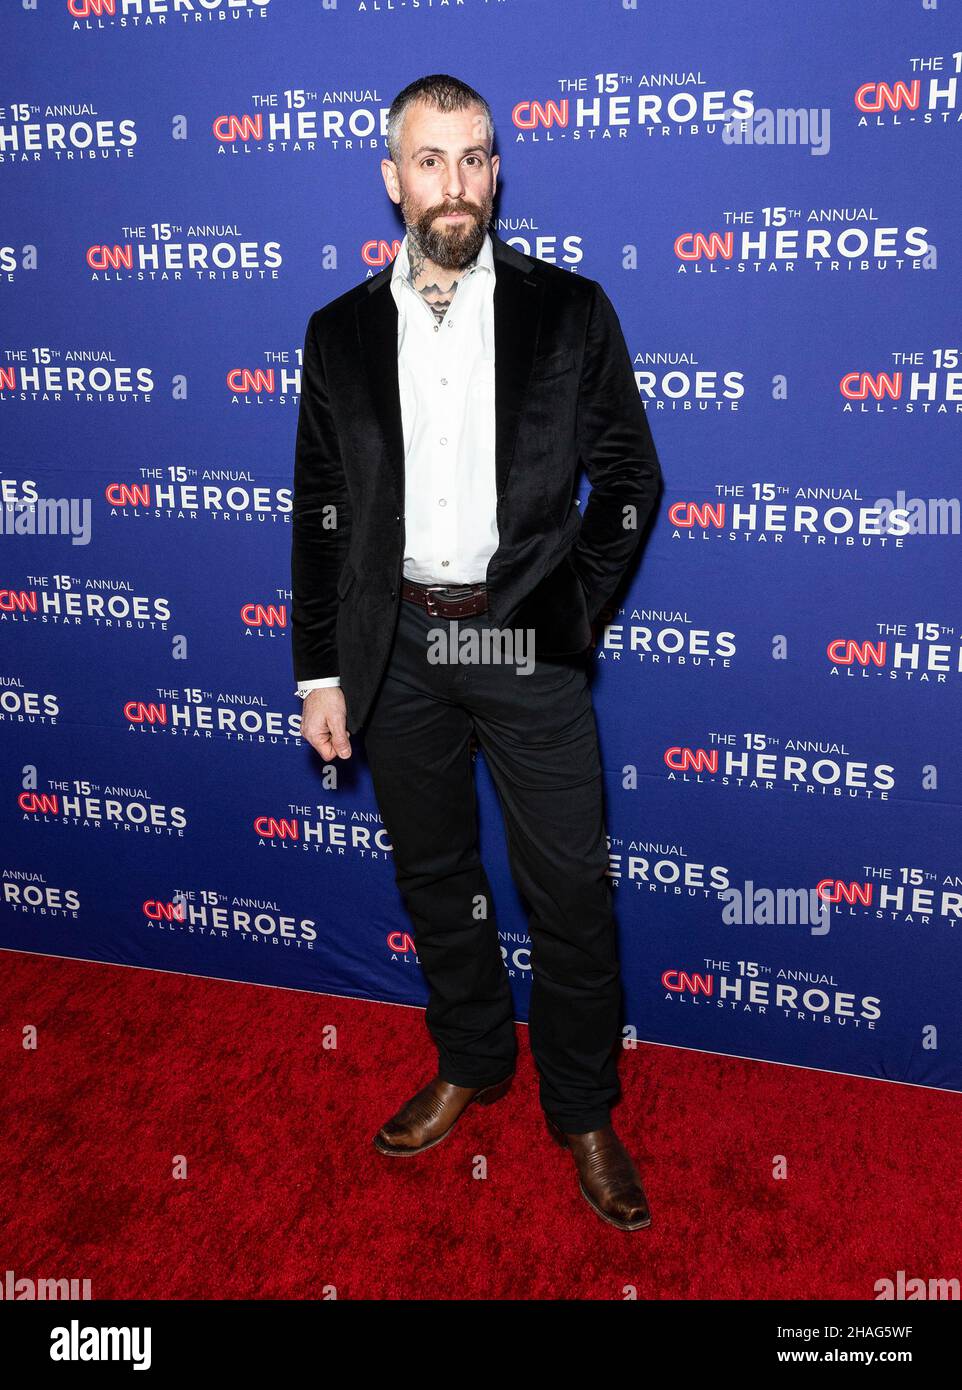 New York, USA. 12th Dec, 2021. Washington DC police officer Michael Fanone attends 15th Annual CNN Heroes All-Star Tribute at American Museum of Natural History in New York on December 12, 2021. (Photo by Lev Radin/Sipa USA) Credit: Sipa USA/Alamy Live News Stock Photo